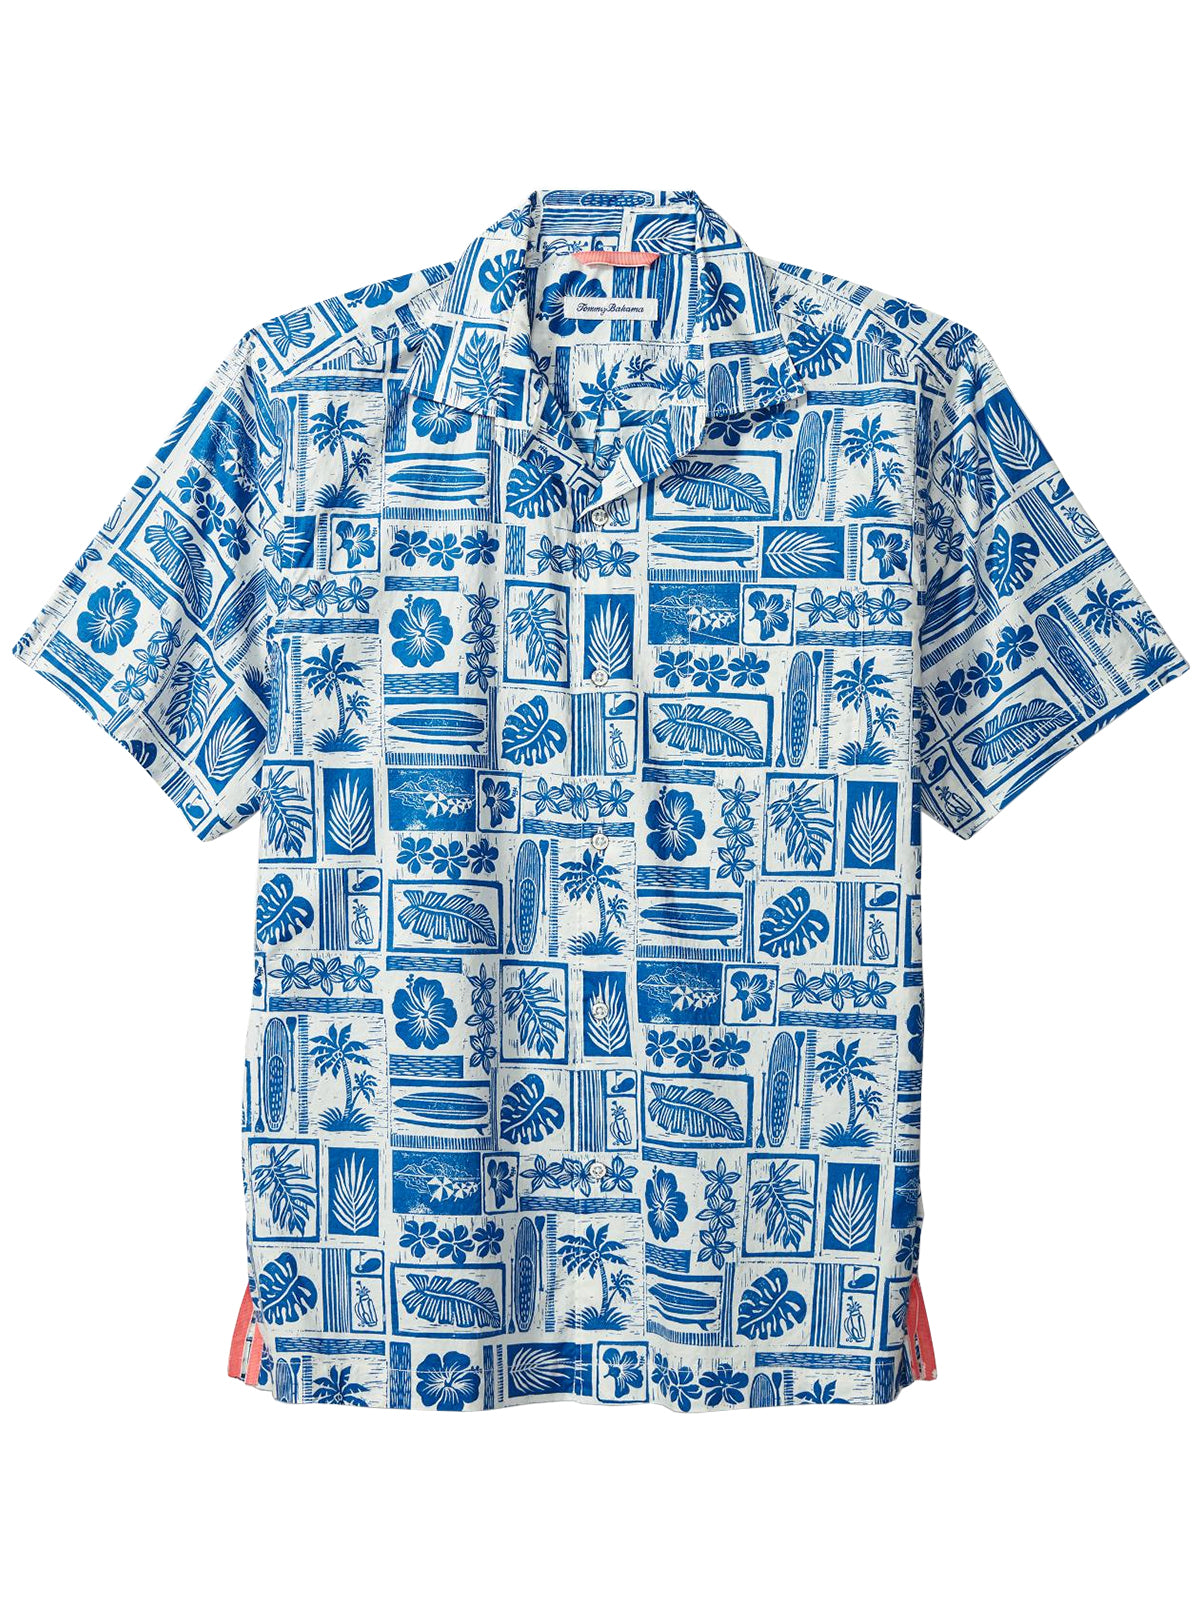 Tommy Bahama 100% Cotton Lido Beach Camp Shirts in